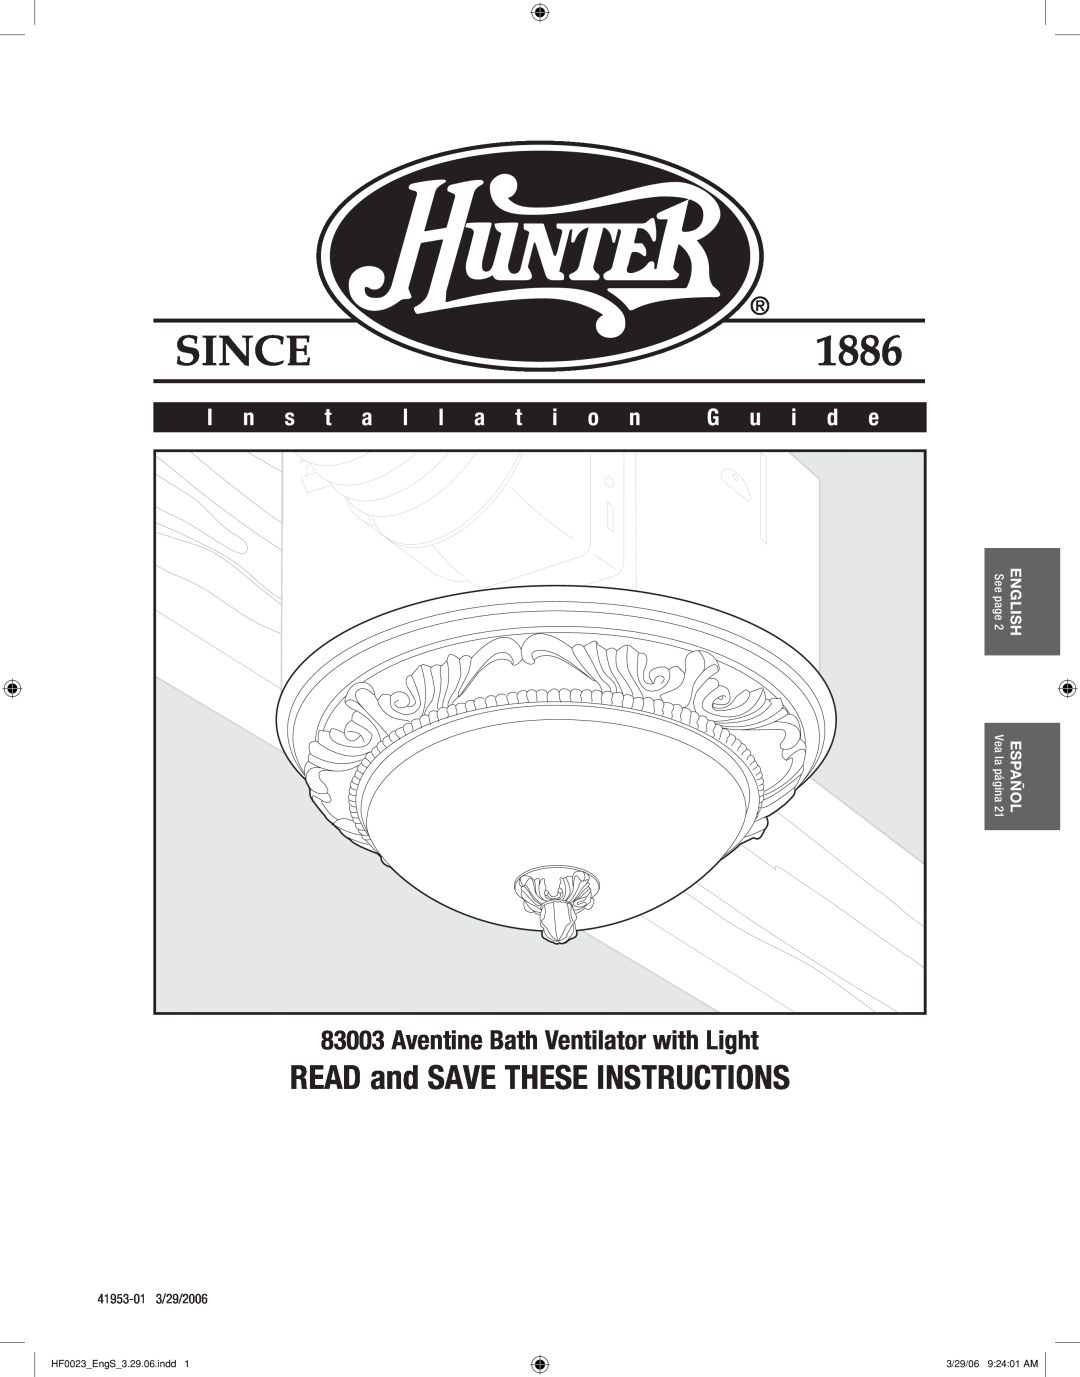 Hunter Fan 83003 manual READ and SAVE THESE INSTRUCTIONS, Aventine Bath Ventilator with Light, I n s t a l l a t i o n 